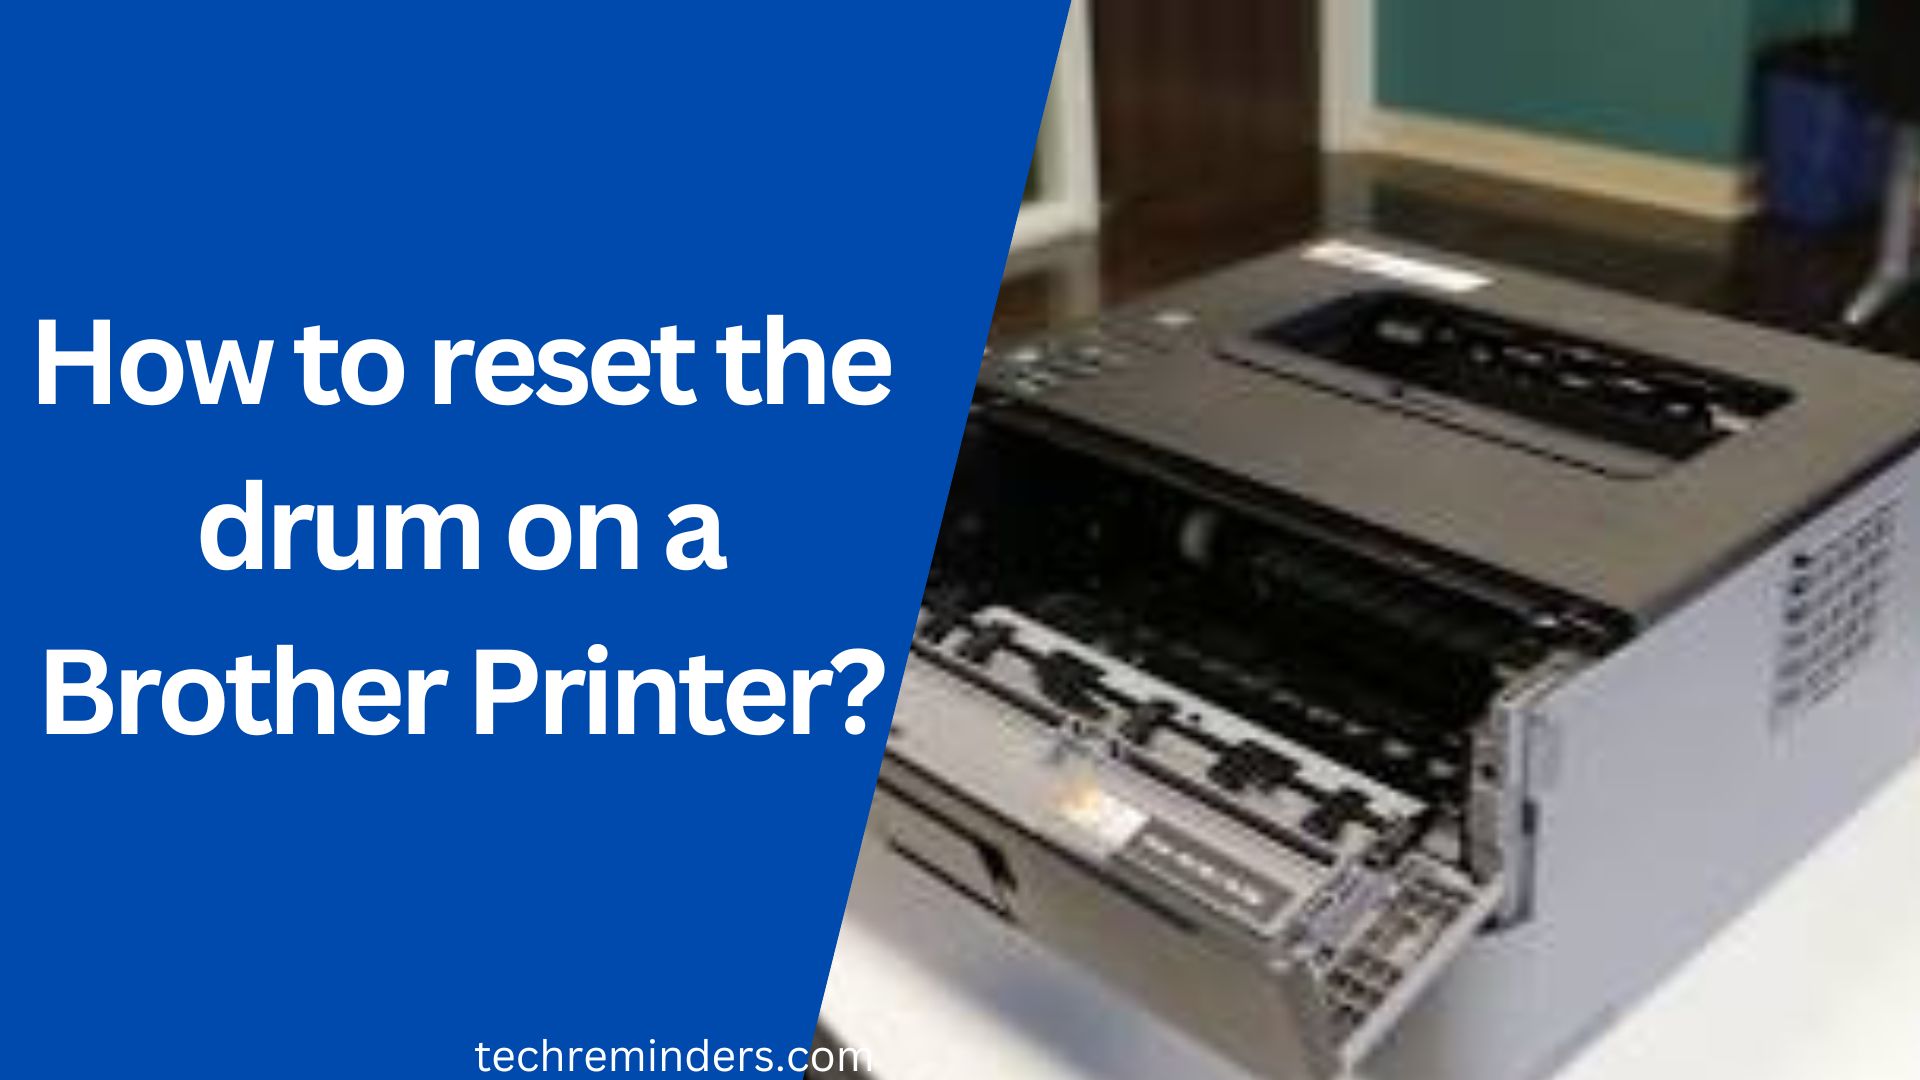 How to reset the drum on a Brother Printer?